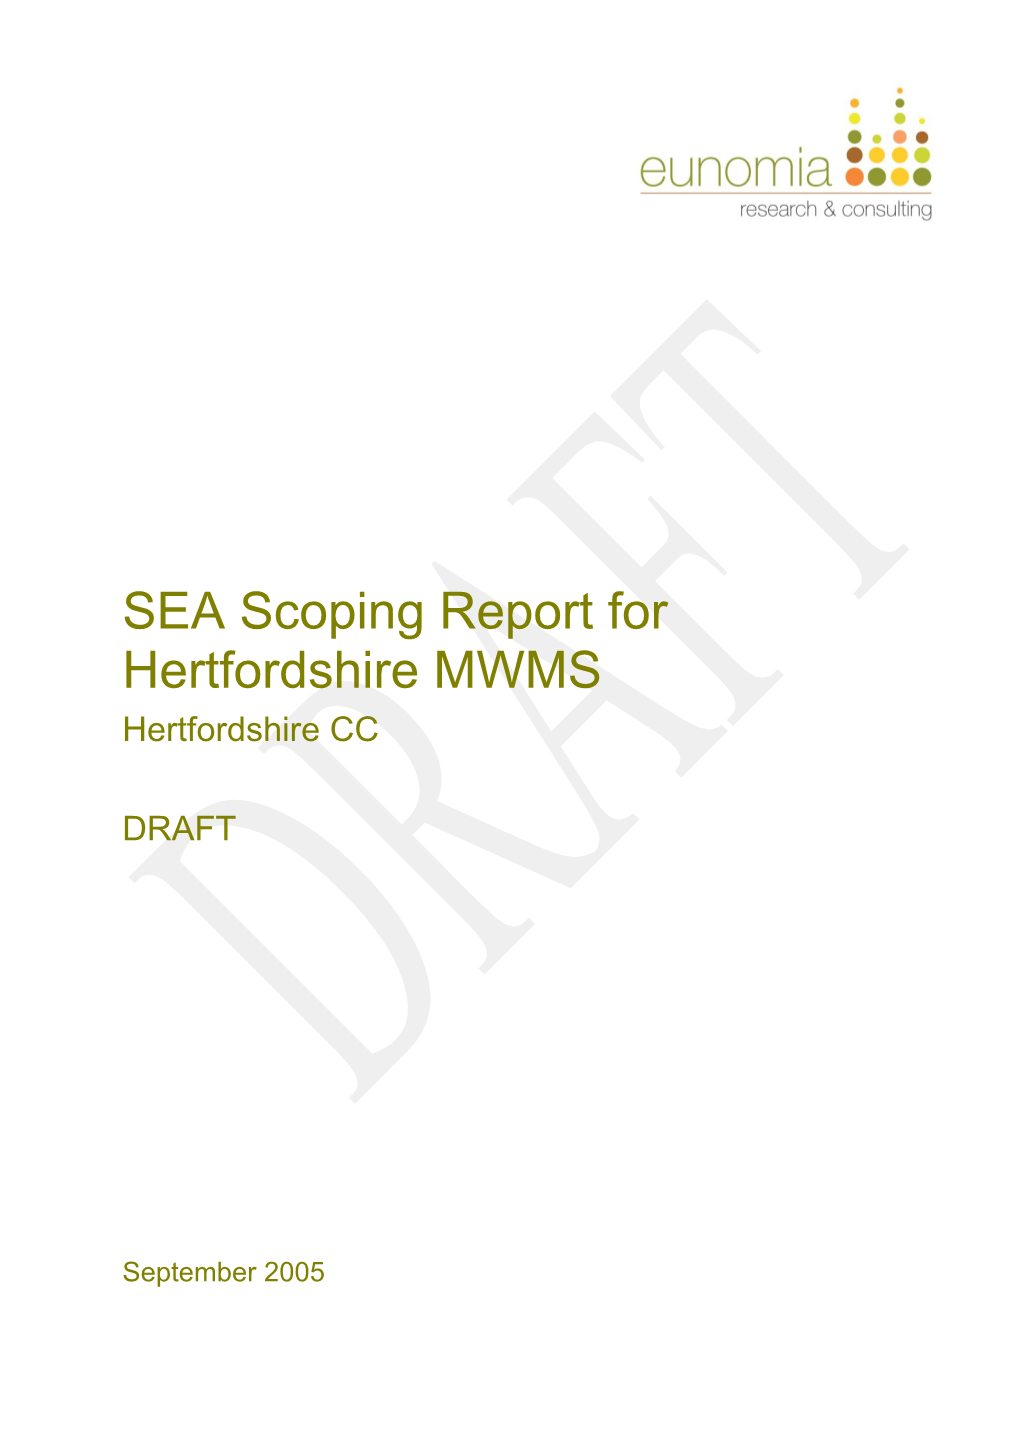 SEA Scoping Report for Hertfordshire MWMS